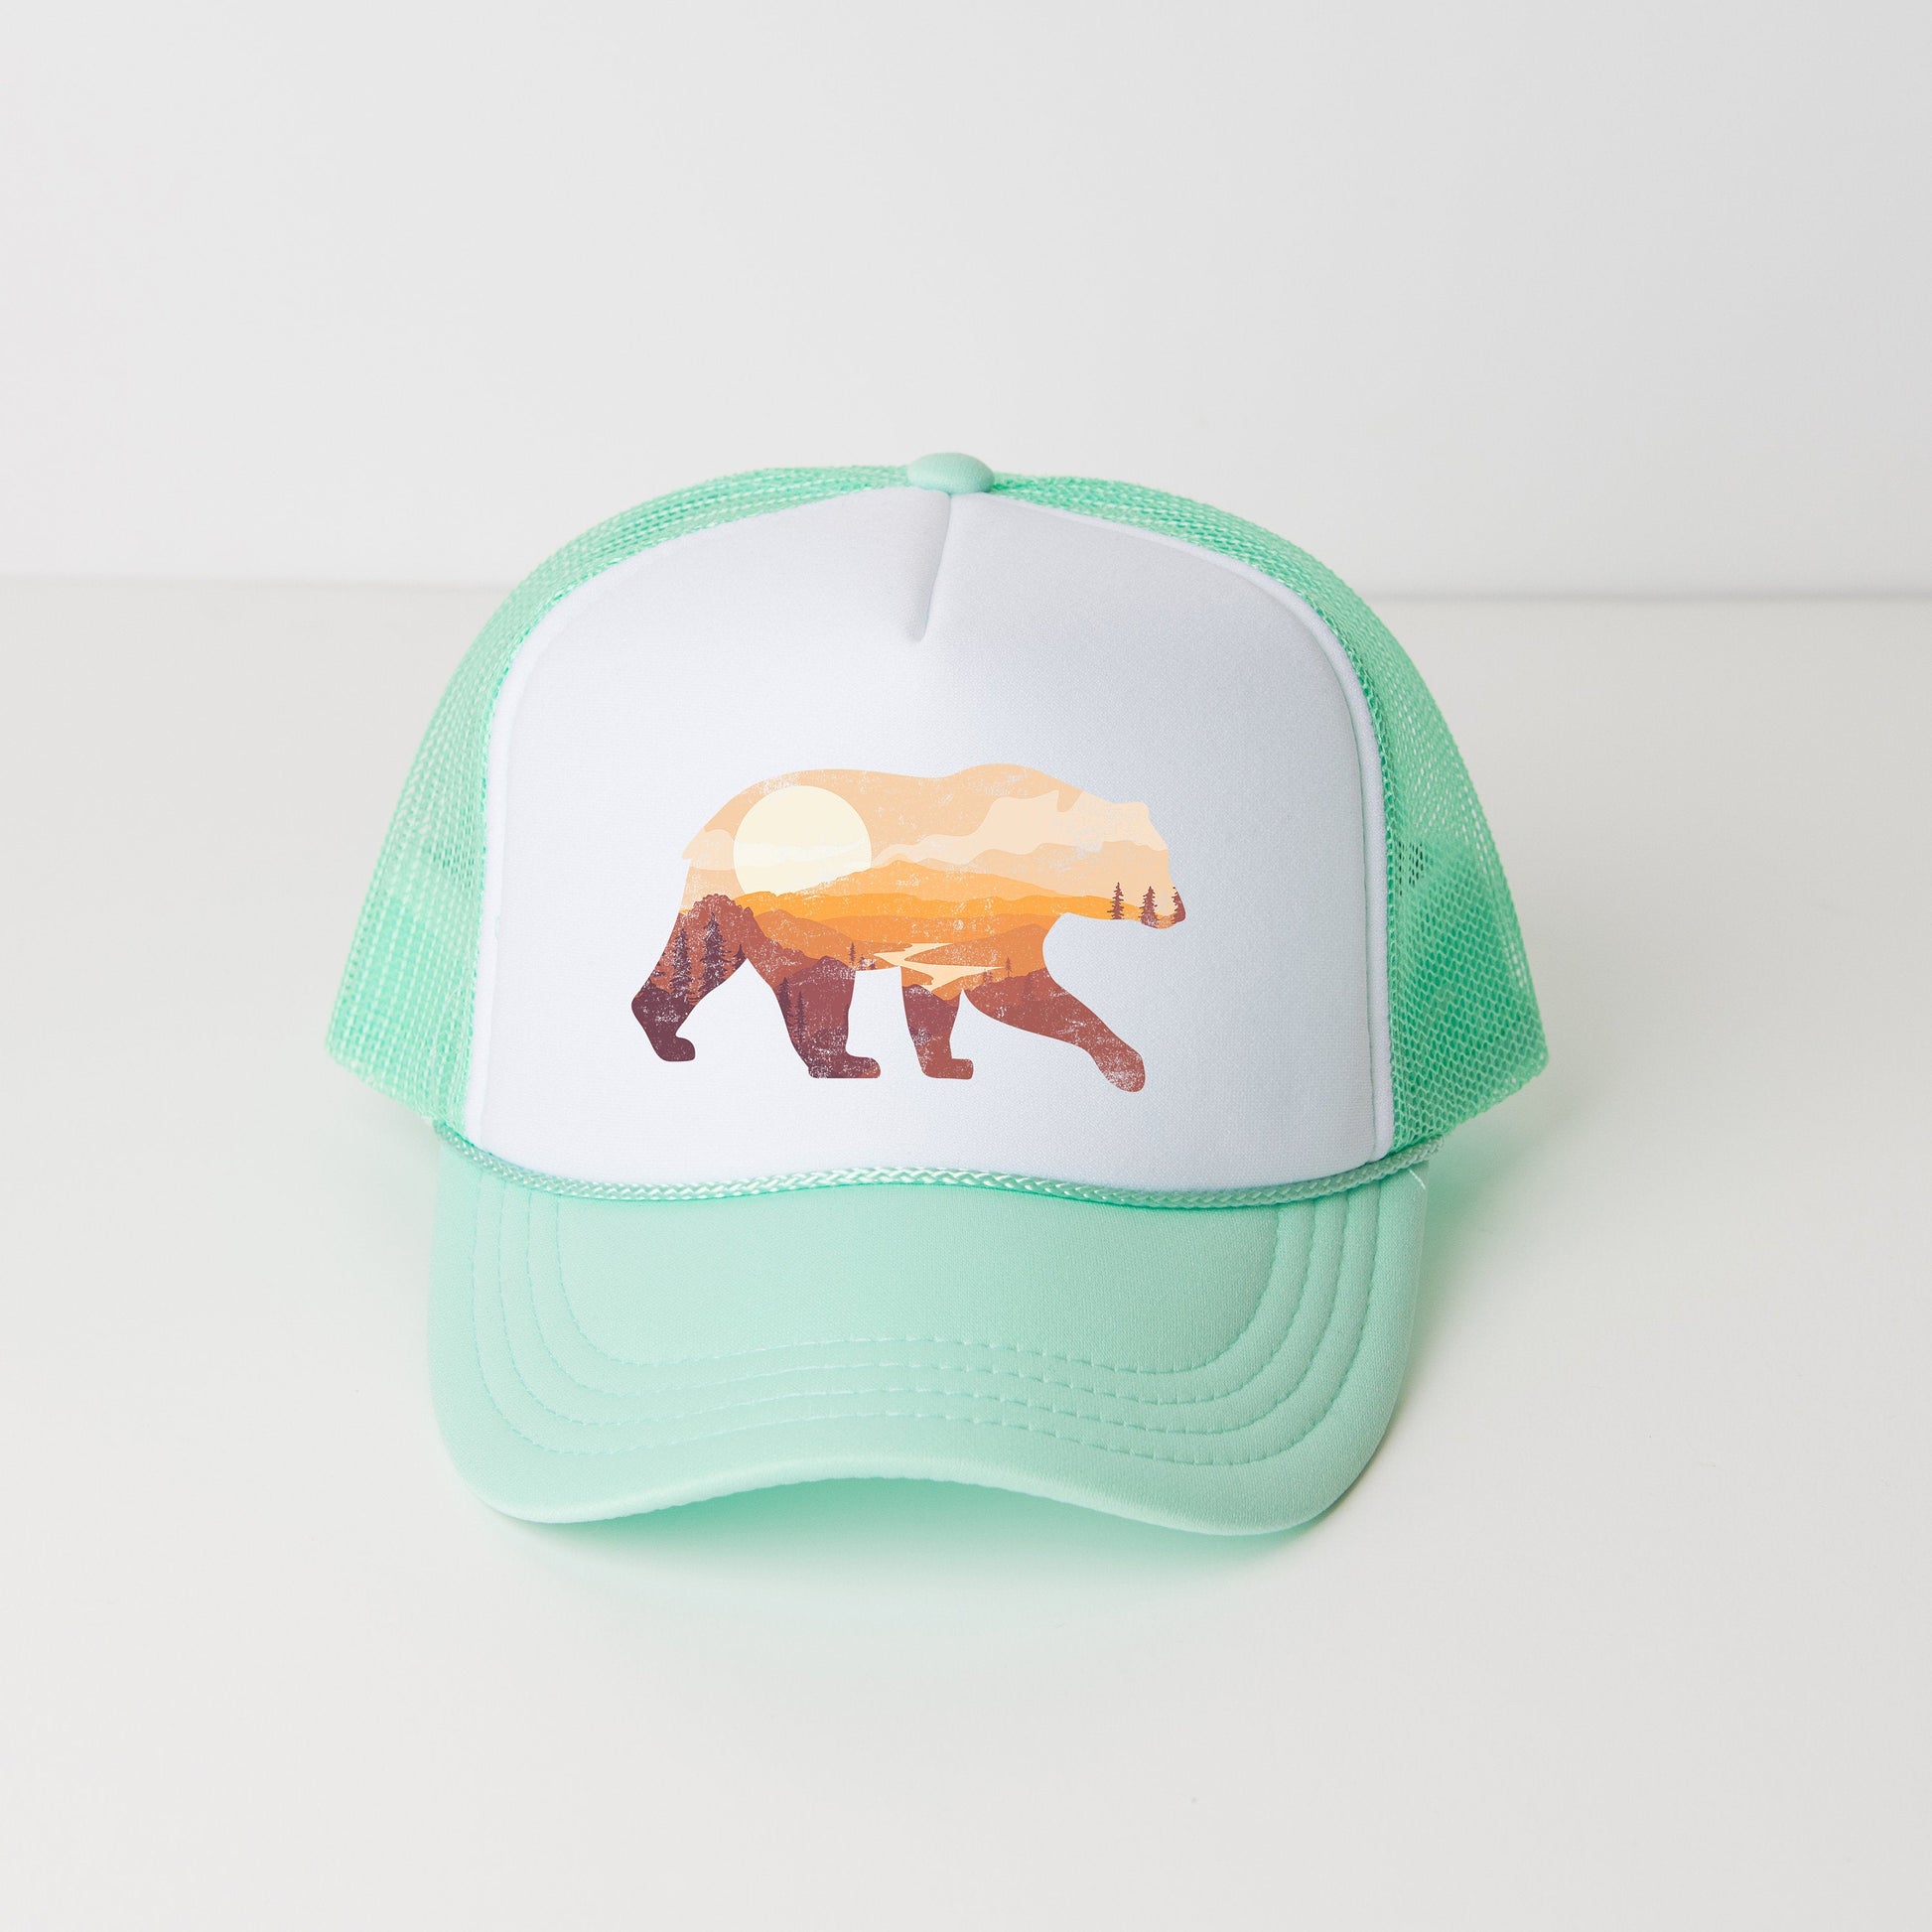 a green and white hat with a picture of a bear on it